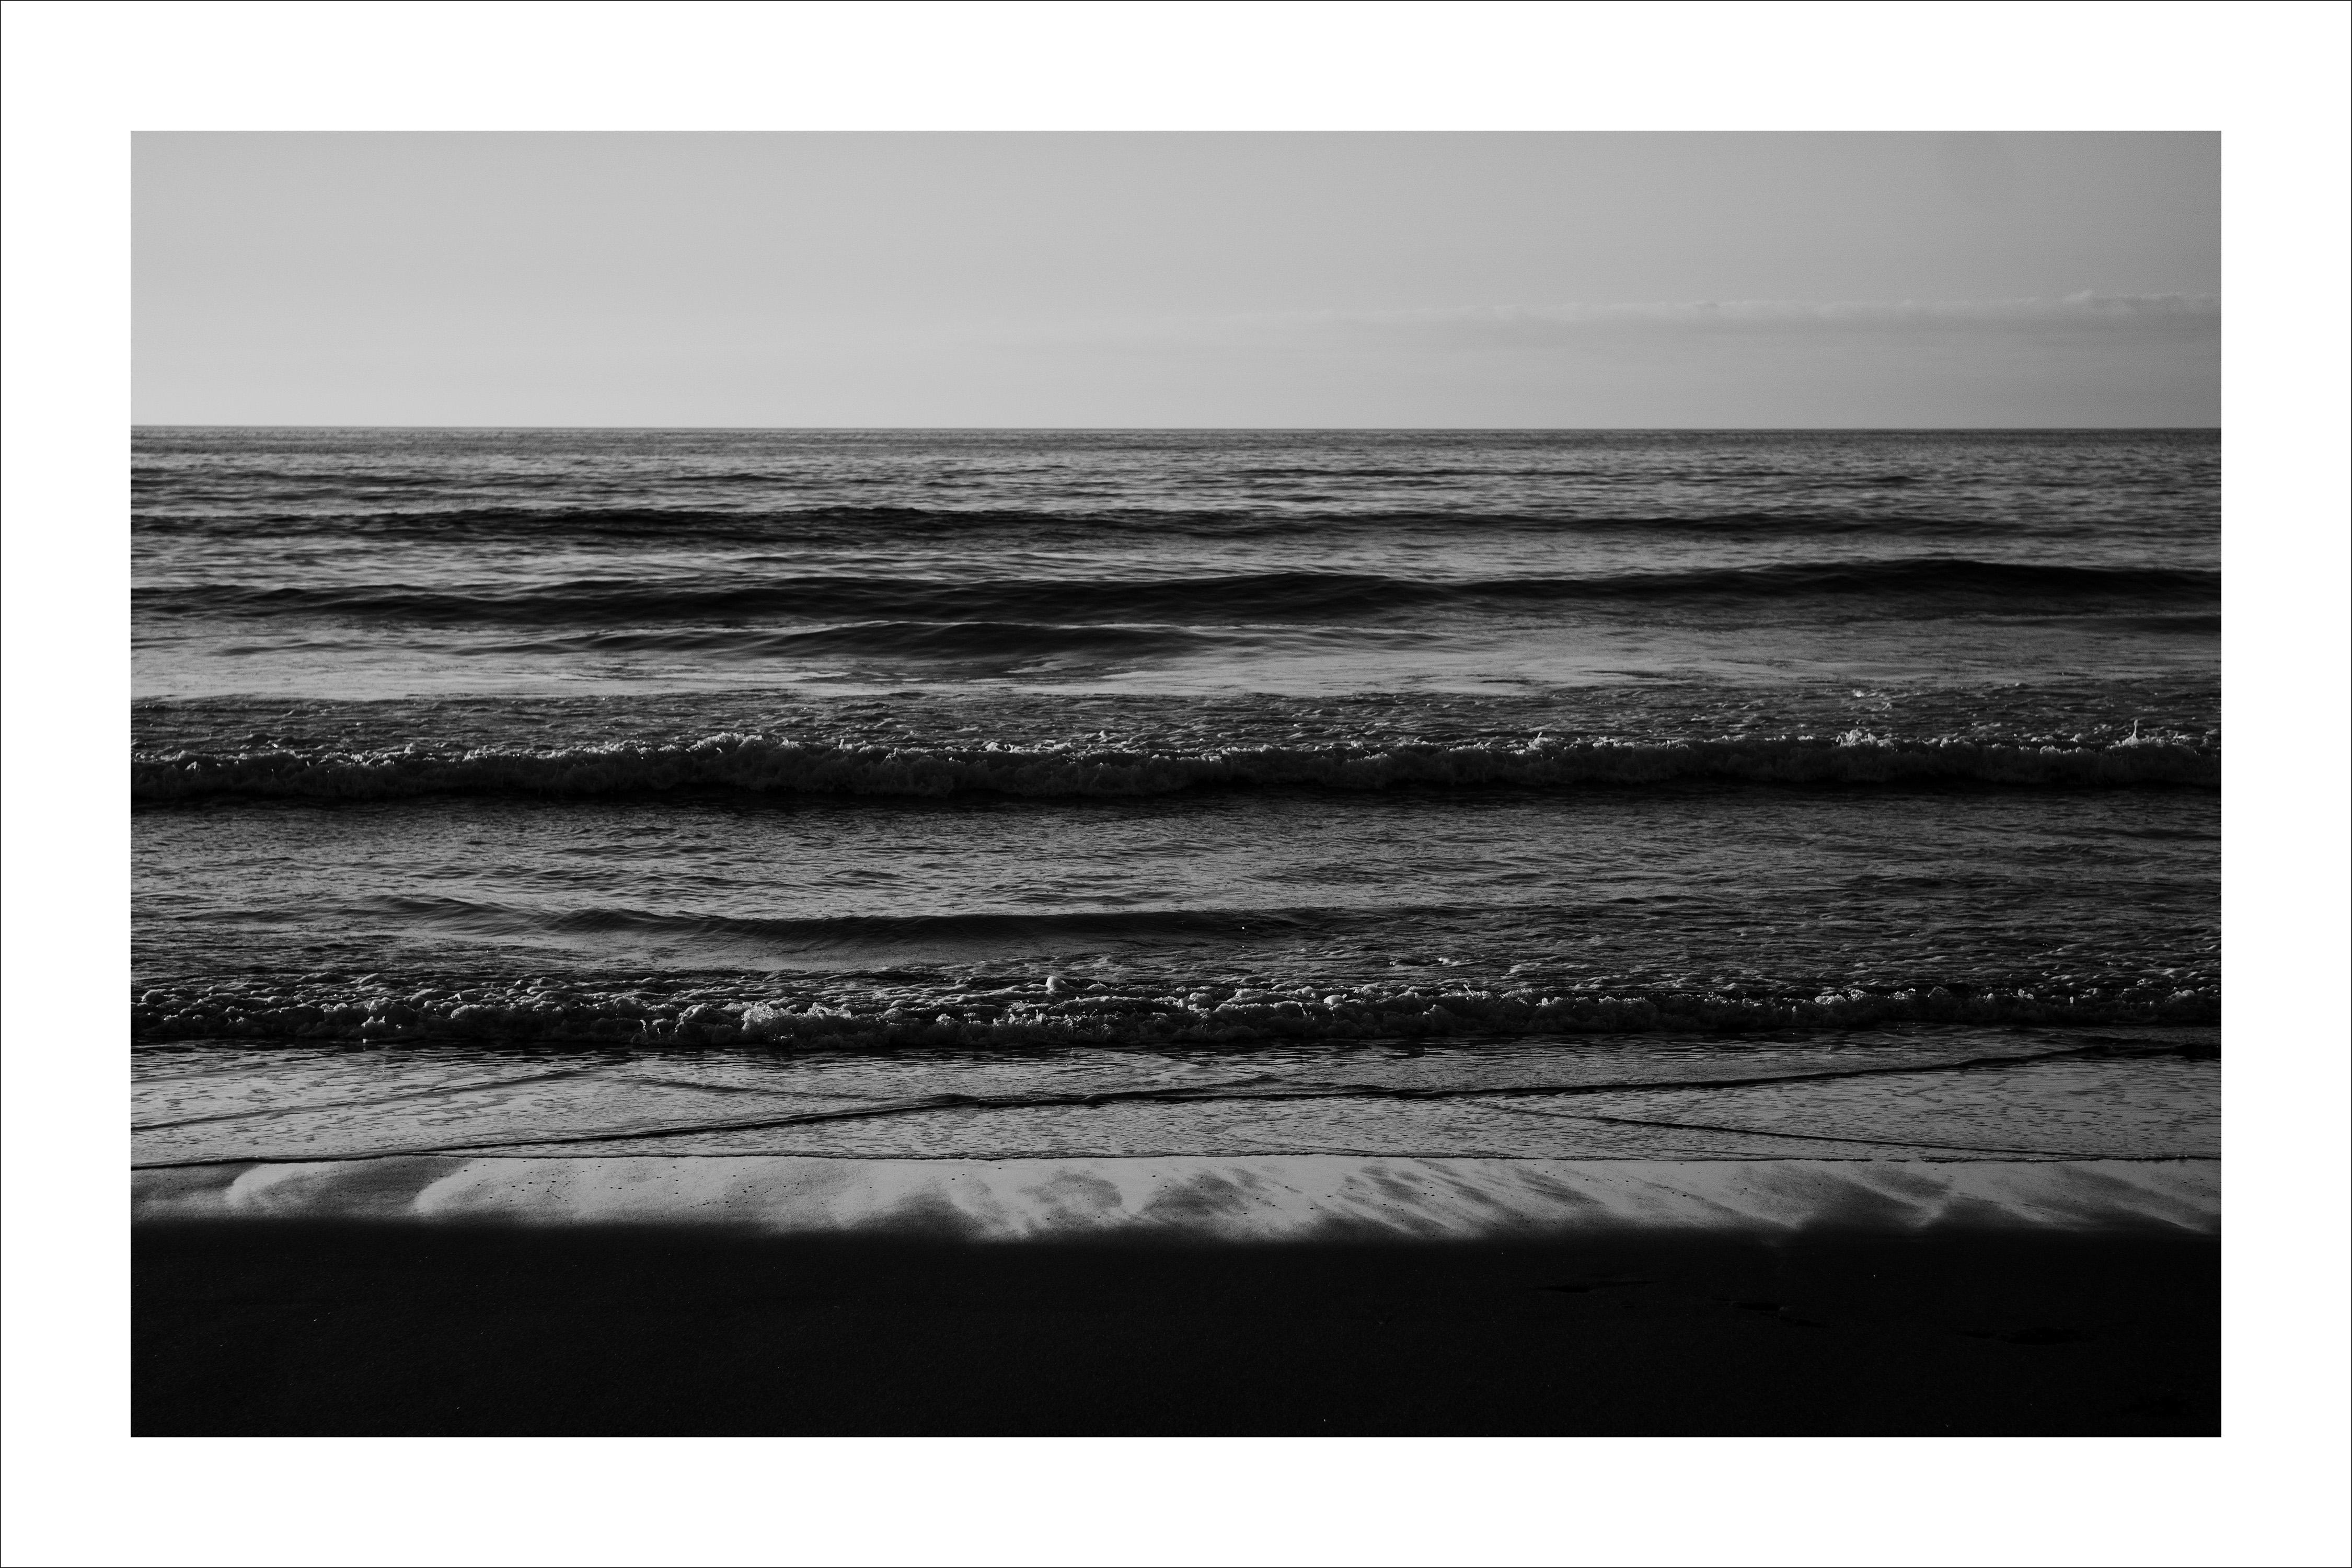 Kind of Cyan Landscape Photograph - Pacific Beach Horizon, Sunset Seashore in Black and White, Sugimoto Style Giclée